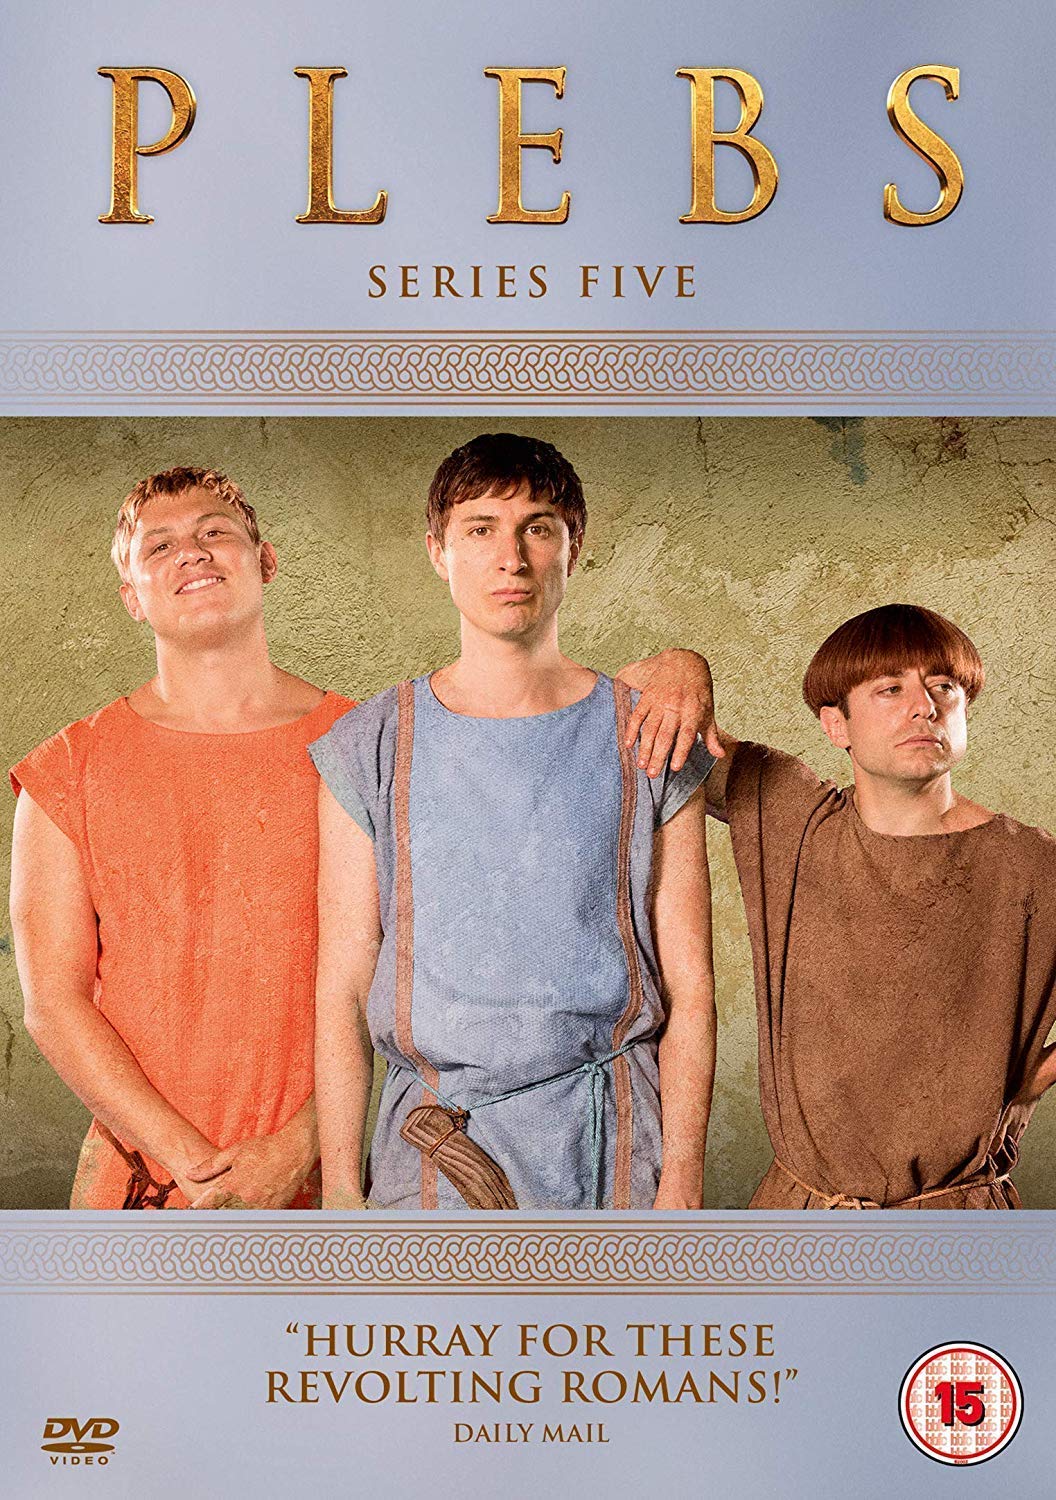 boom competitions - win plebs on dvd